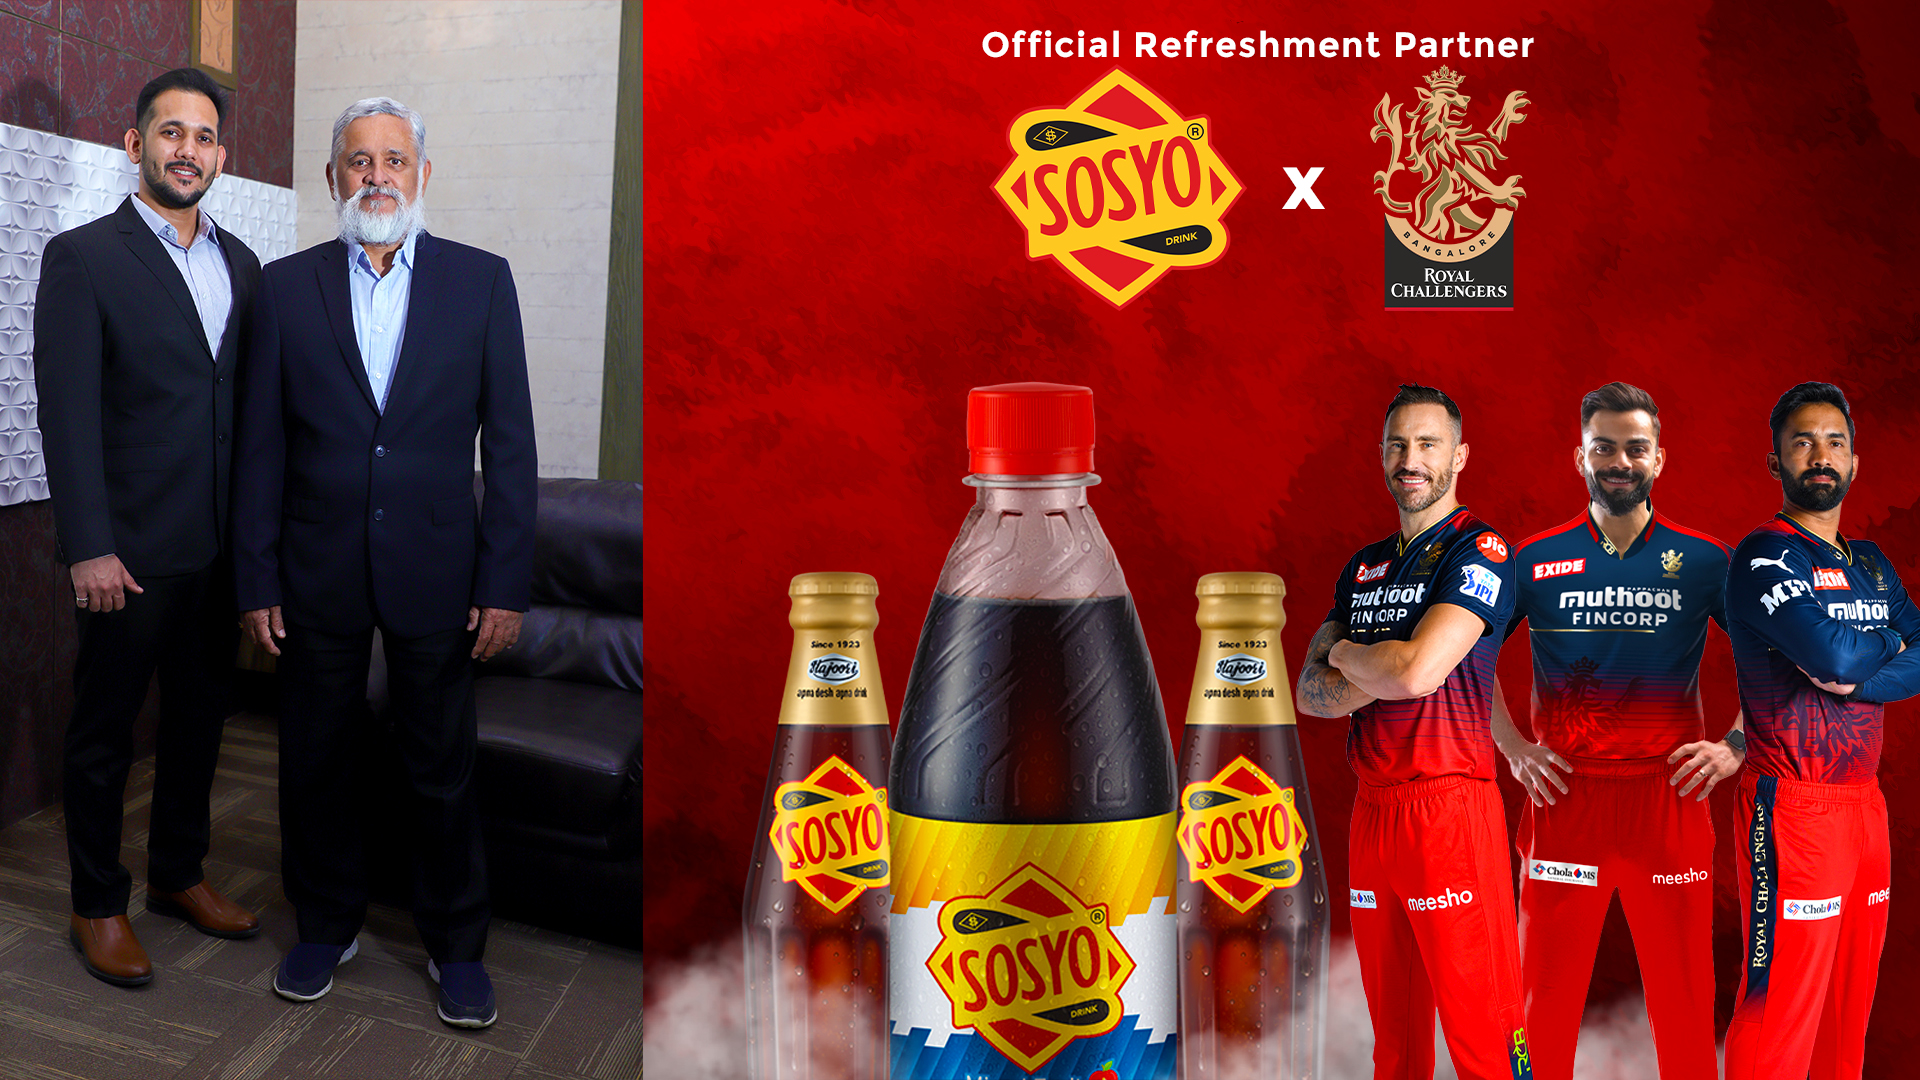 Sosyo Hajoori Beverages Announces Partnership with Royal Challengers Bangalore as their official refreshment partner